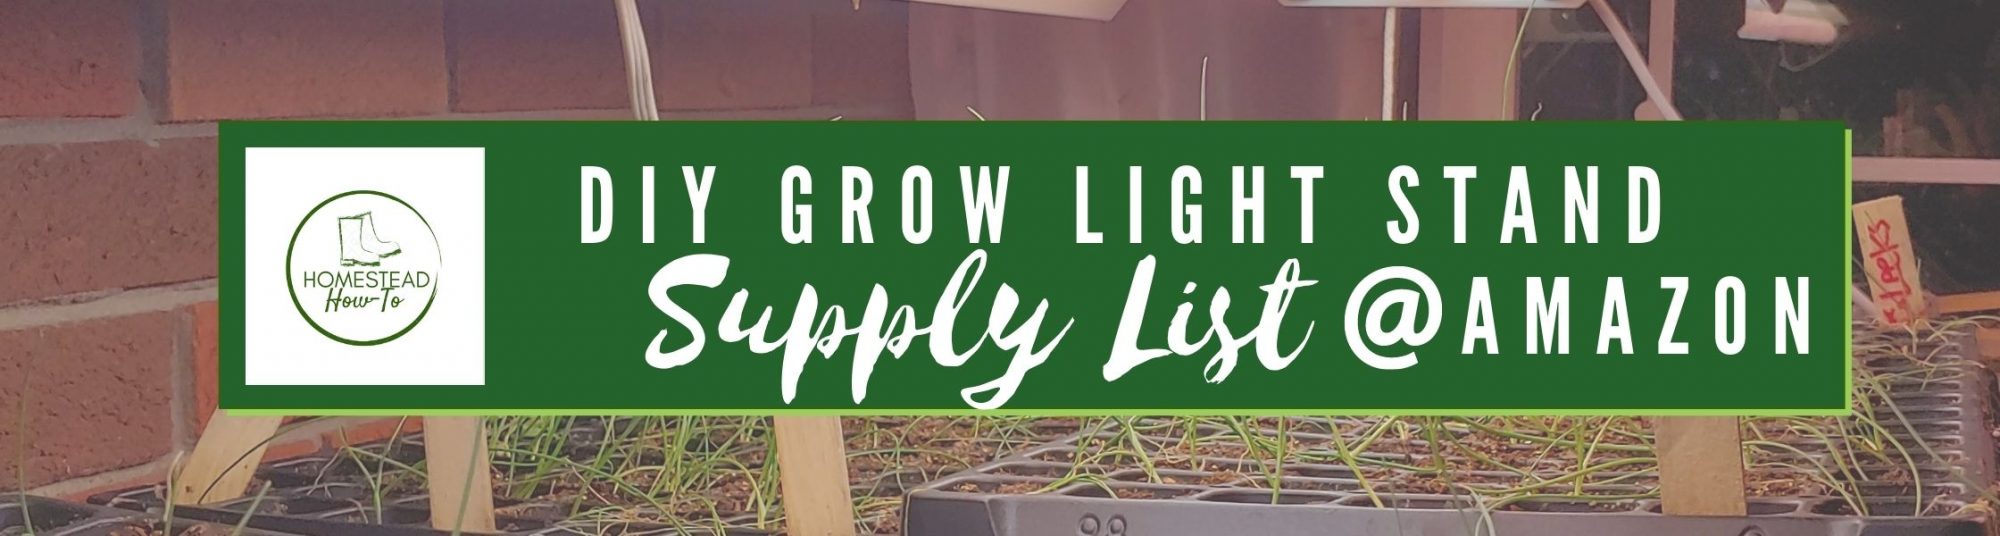 Grow Light Stand Shopping LIst scaled